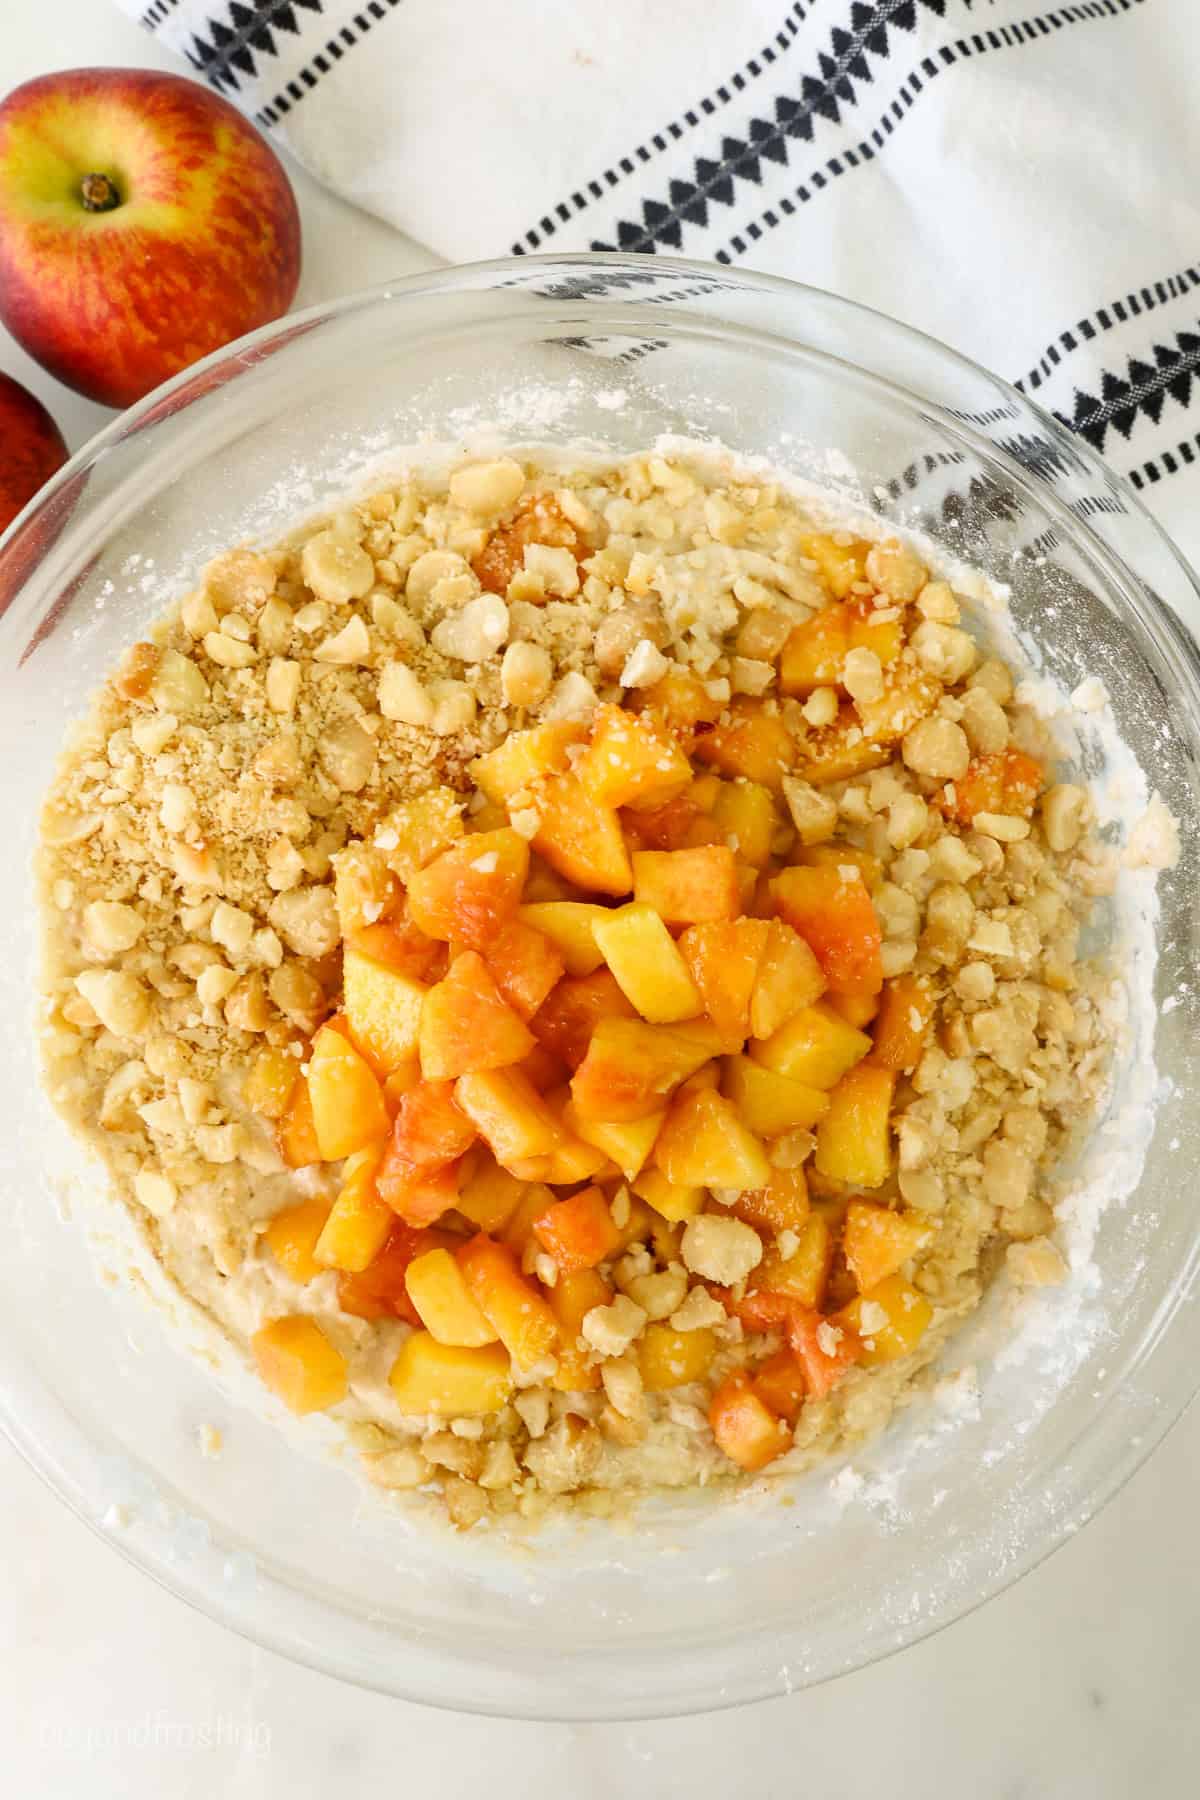 Peaches and macadamia nuts added to muffin batter in a glass mixing bowl.